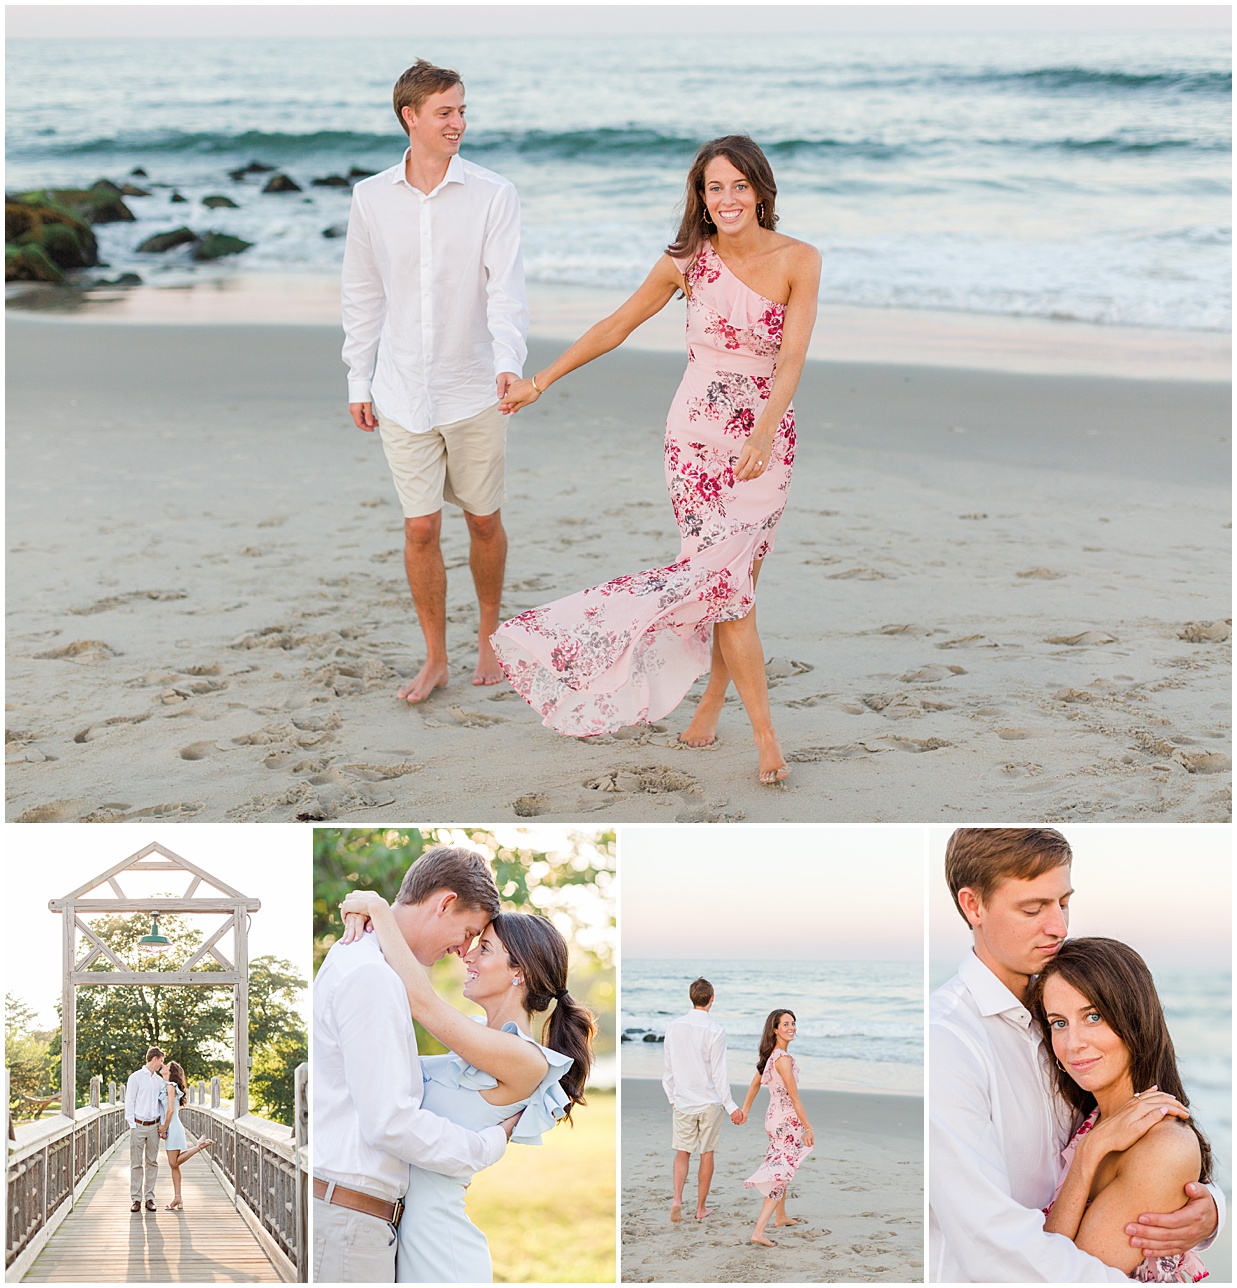 Spring Lake and beach engagement session inspiration